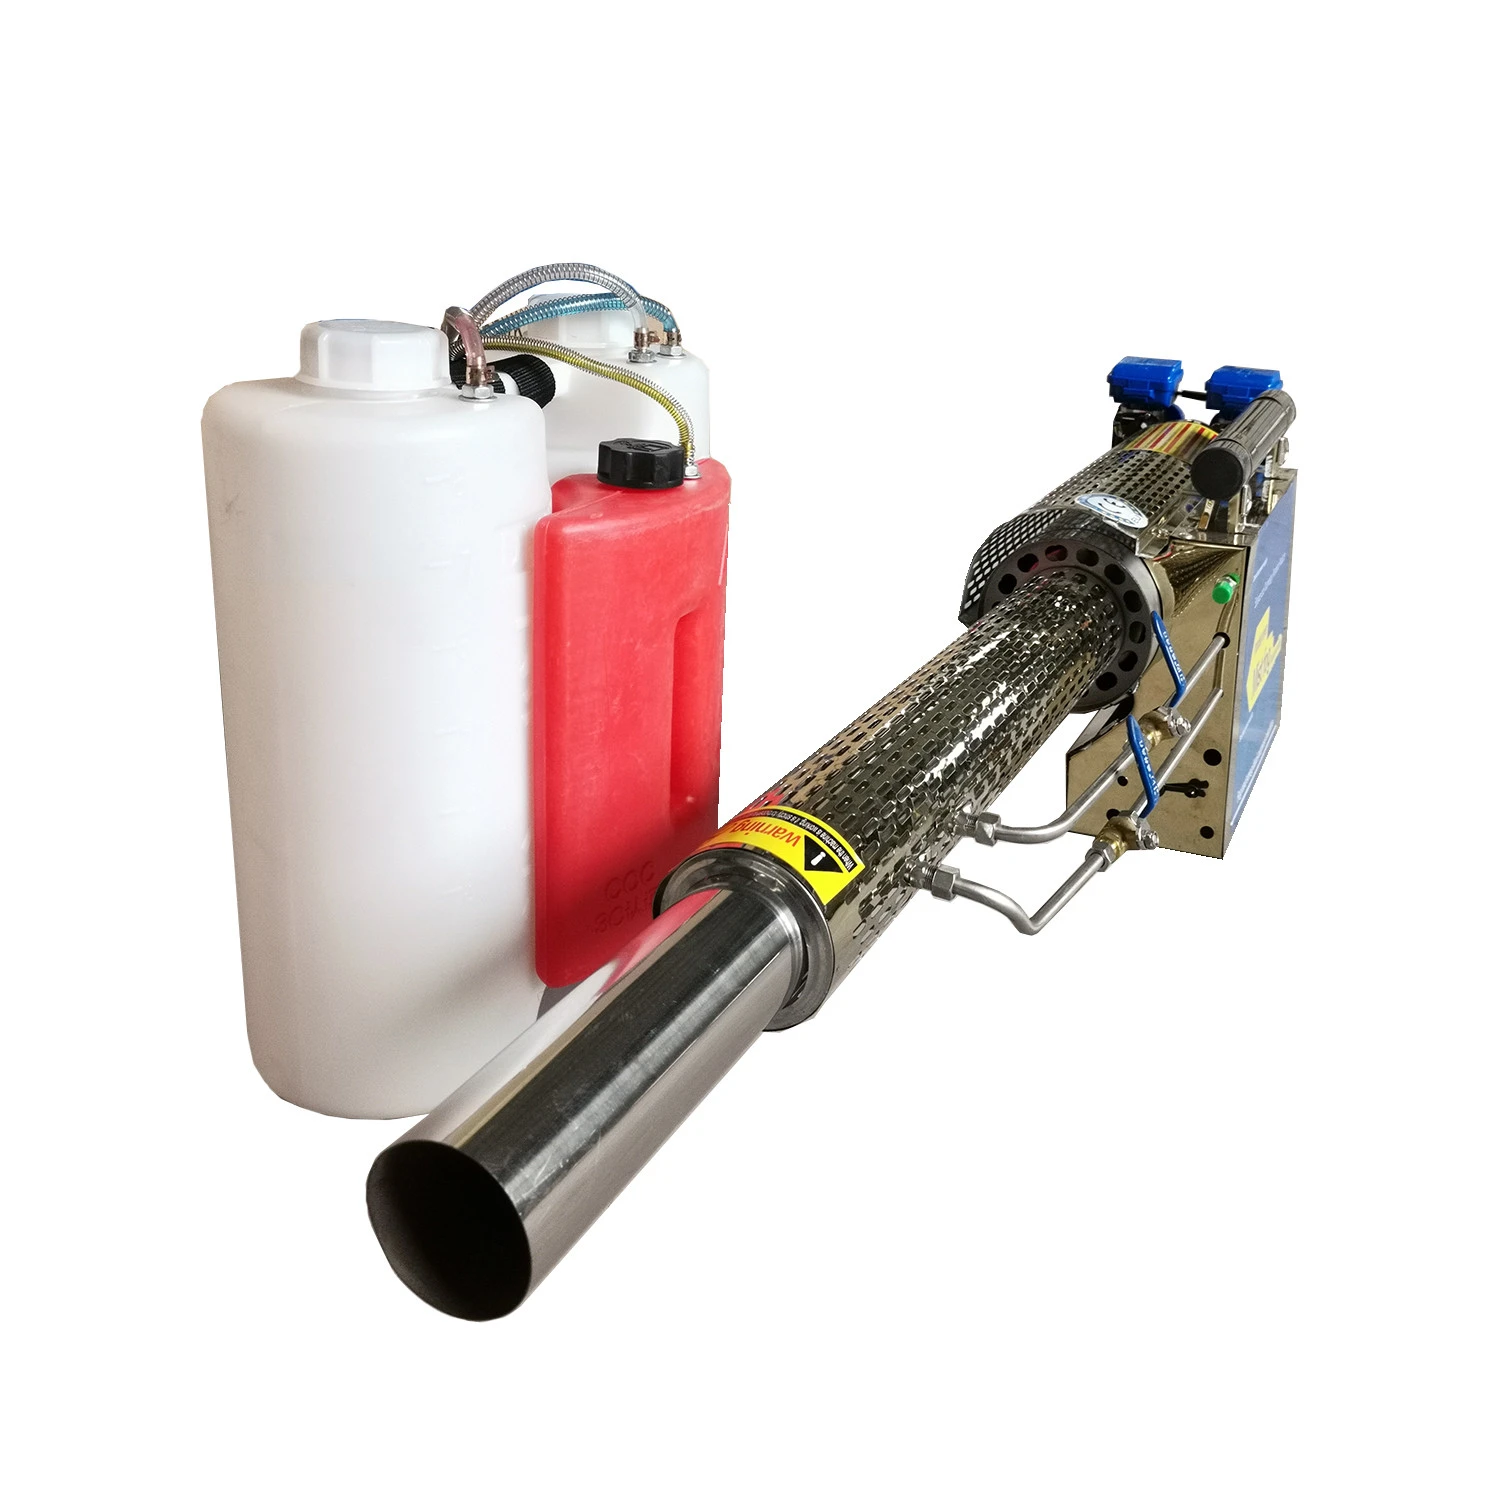 2020 new designed power portable  battery pump sprayer for disinfection in publice area like school ,street and factory